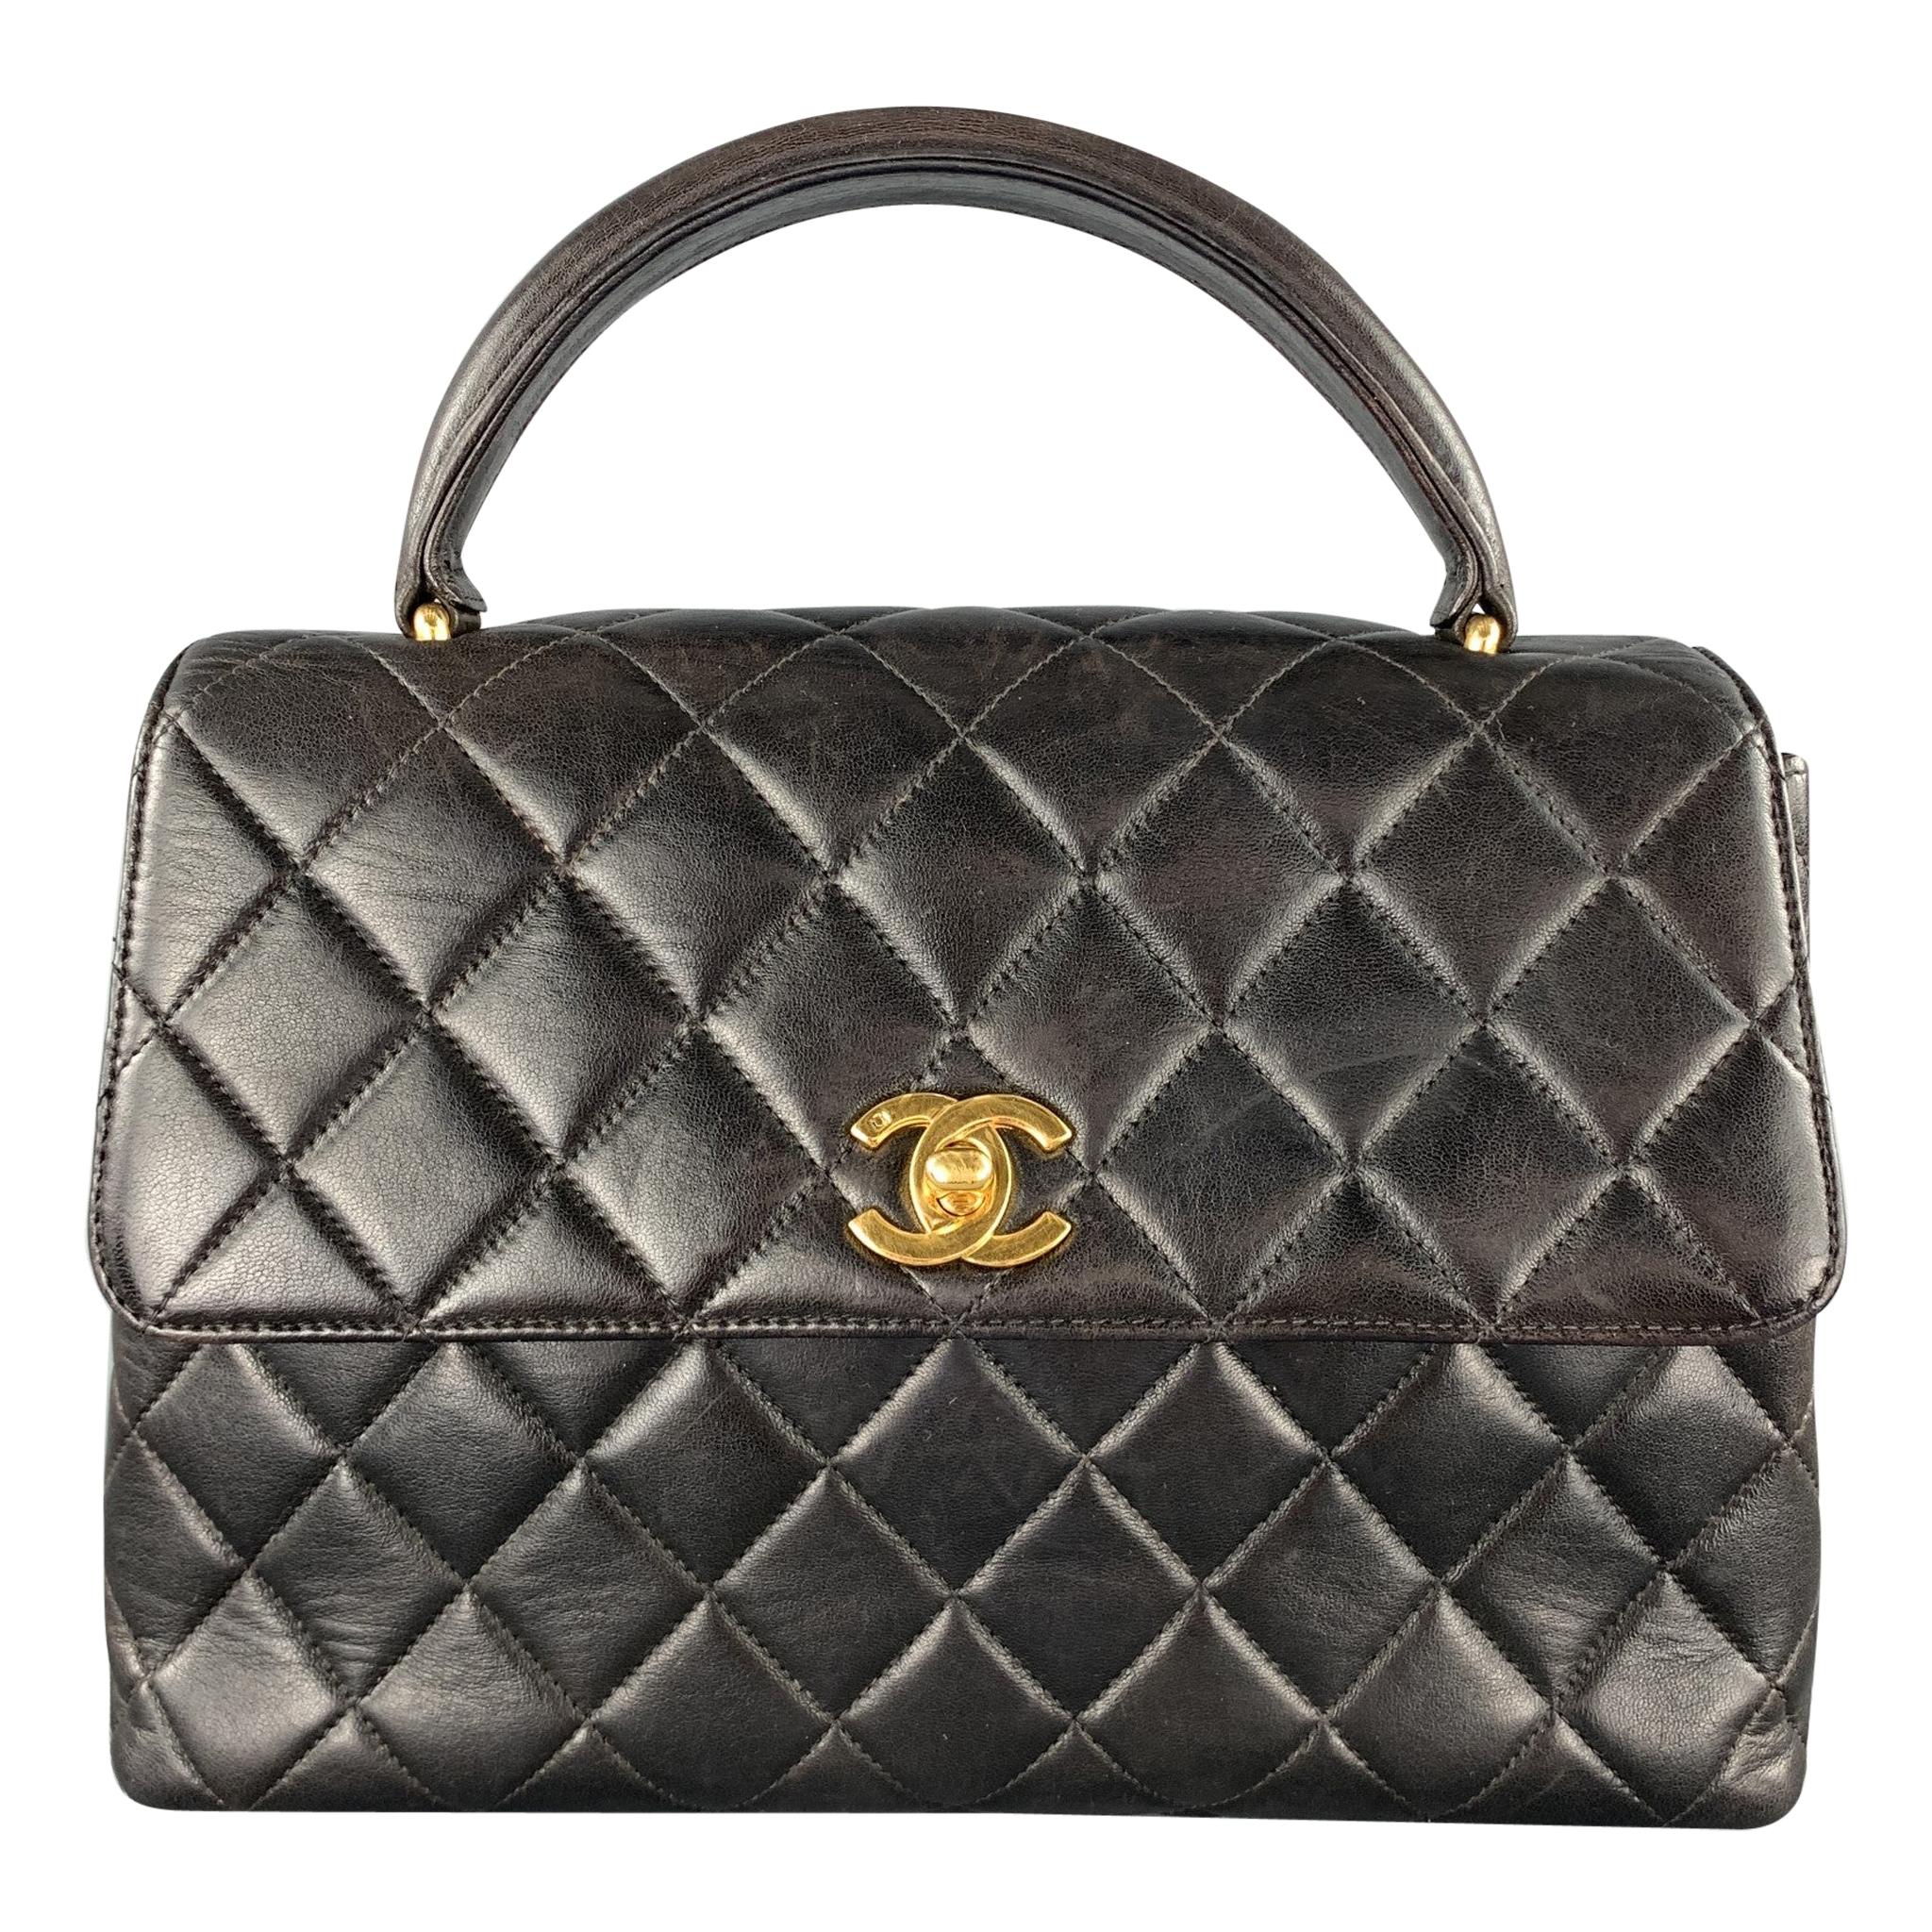 CHANEL 1990's Black Quilted Leather COCO HANDLE CC Handbag Bag